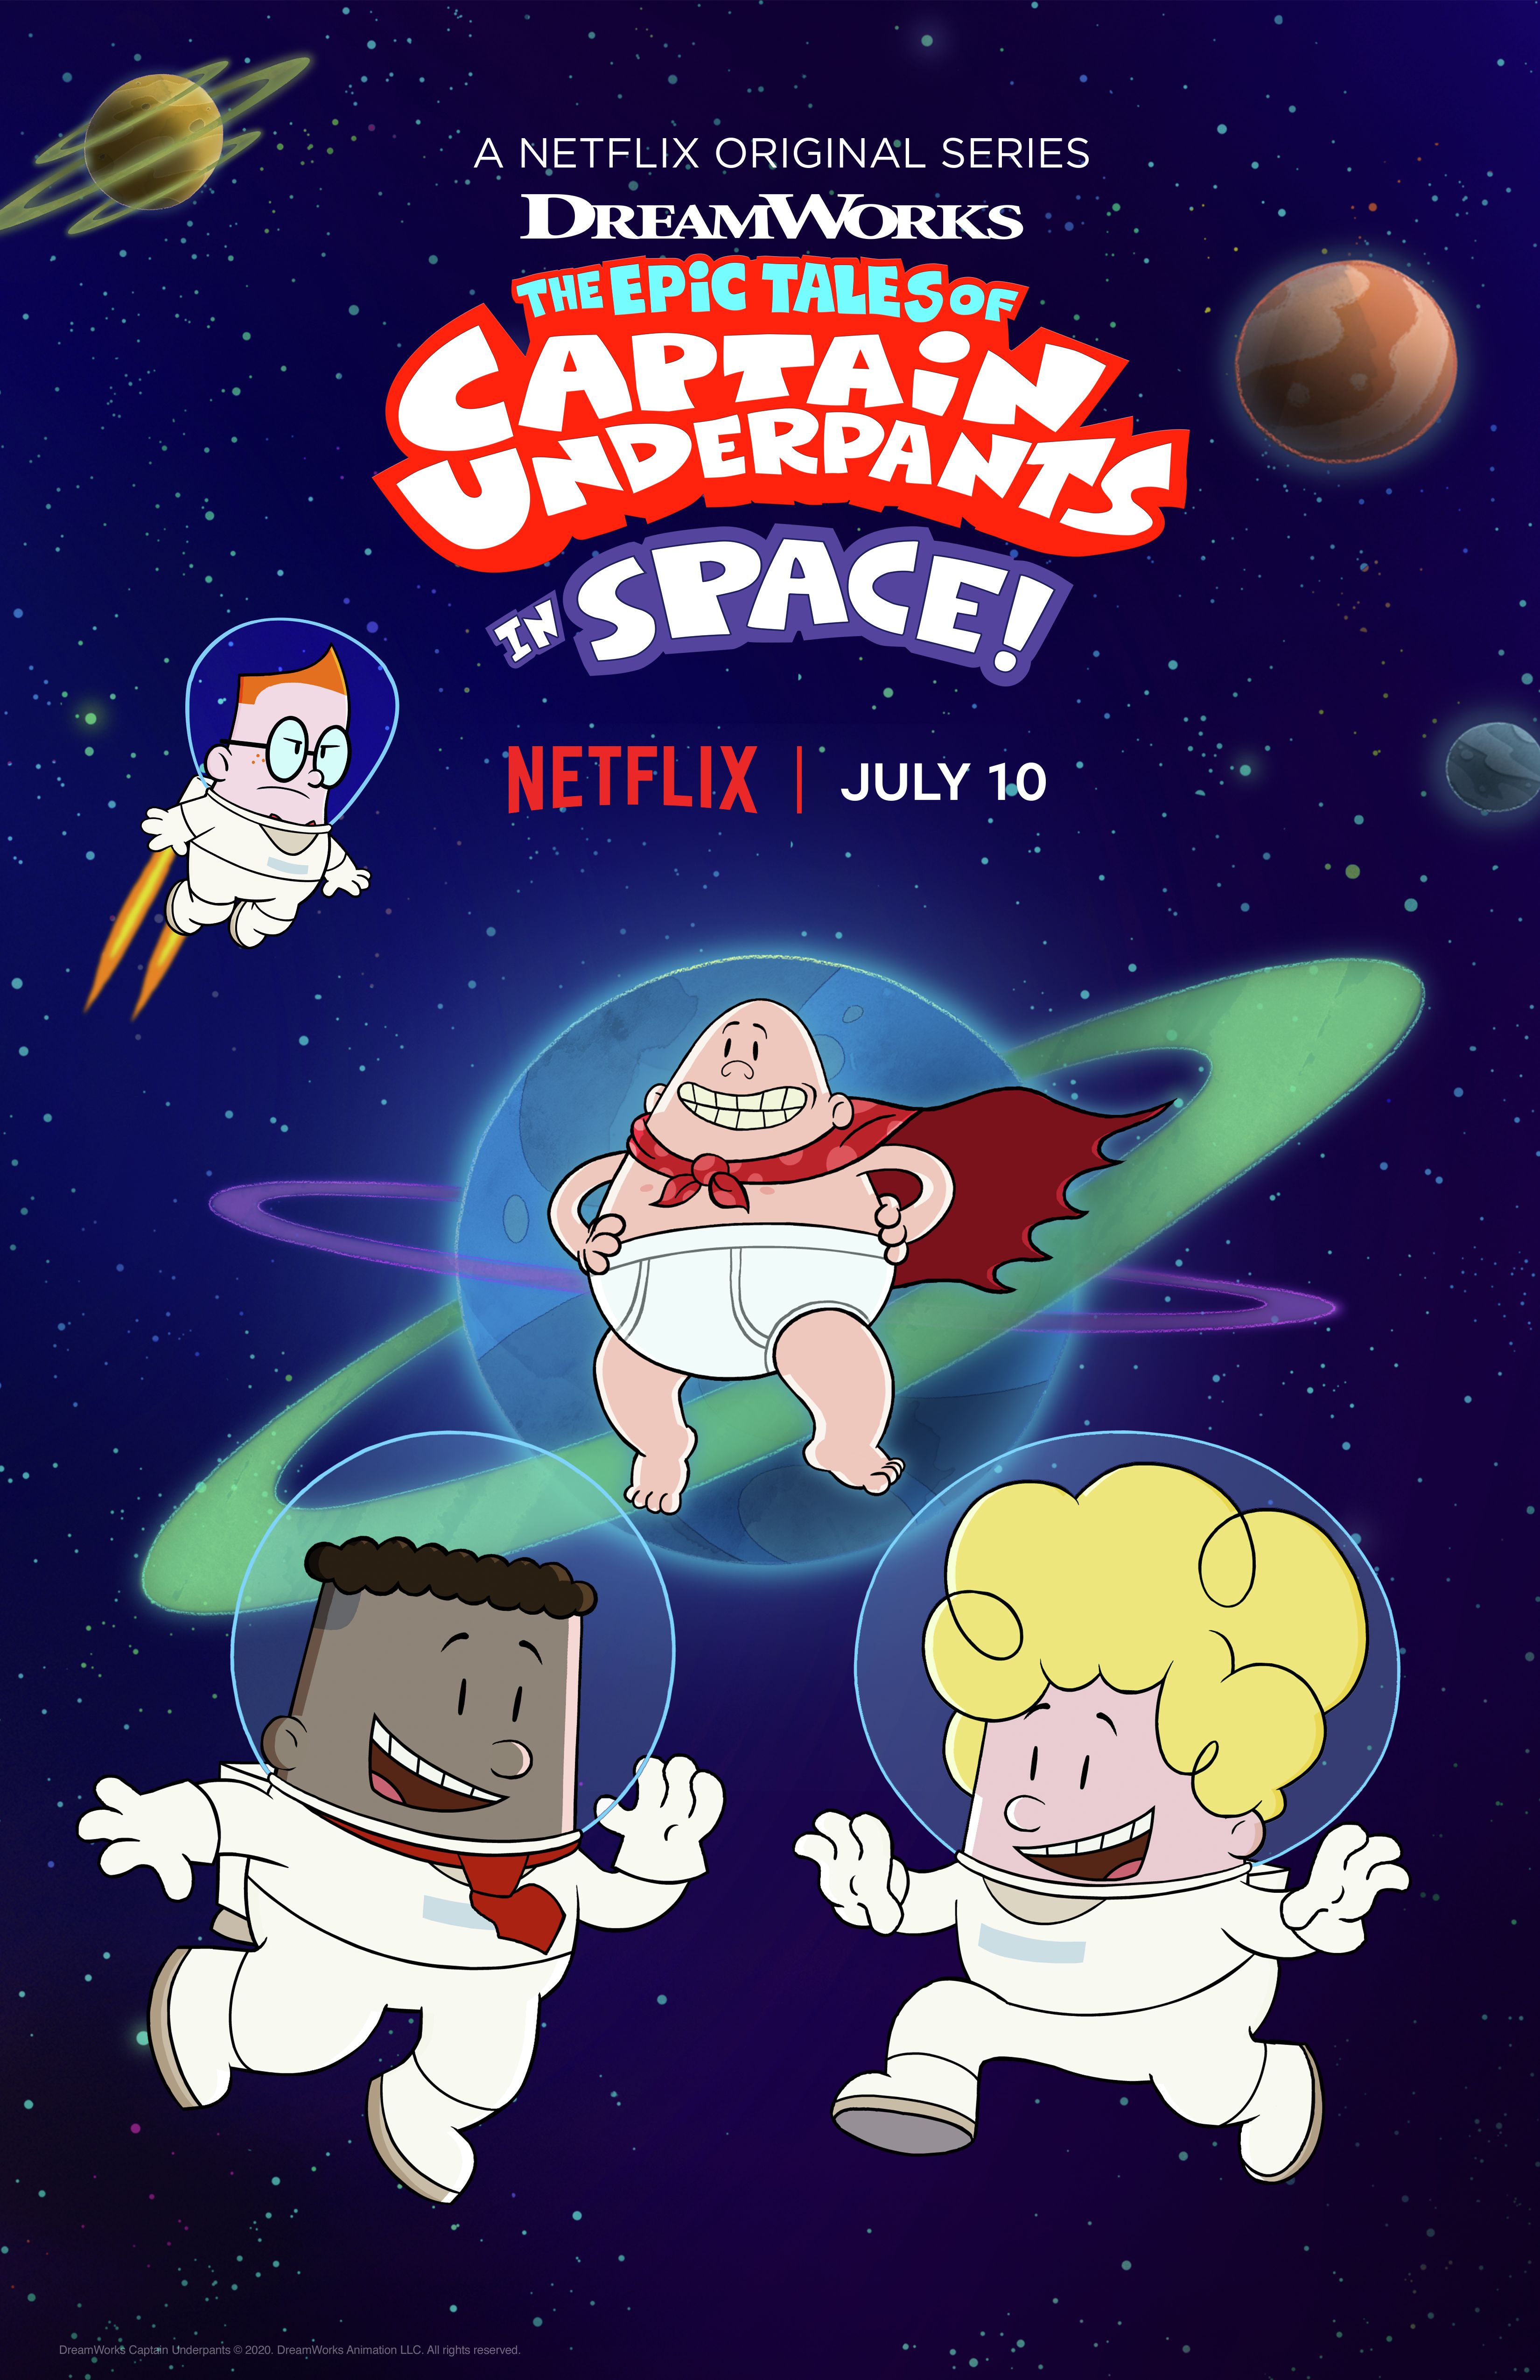 TV ratings for The Epic Tales Of Captain Underpants In Space in Noruega. Netflix TV series